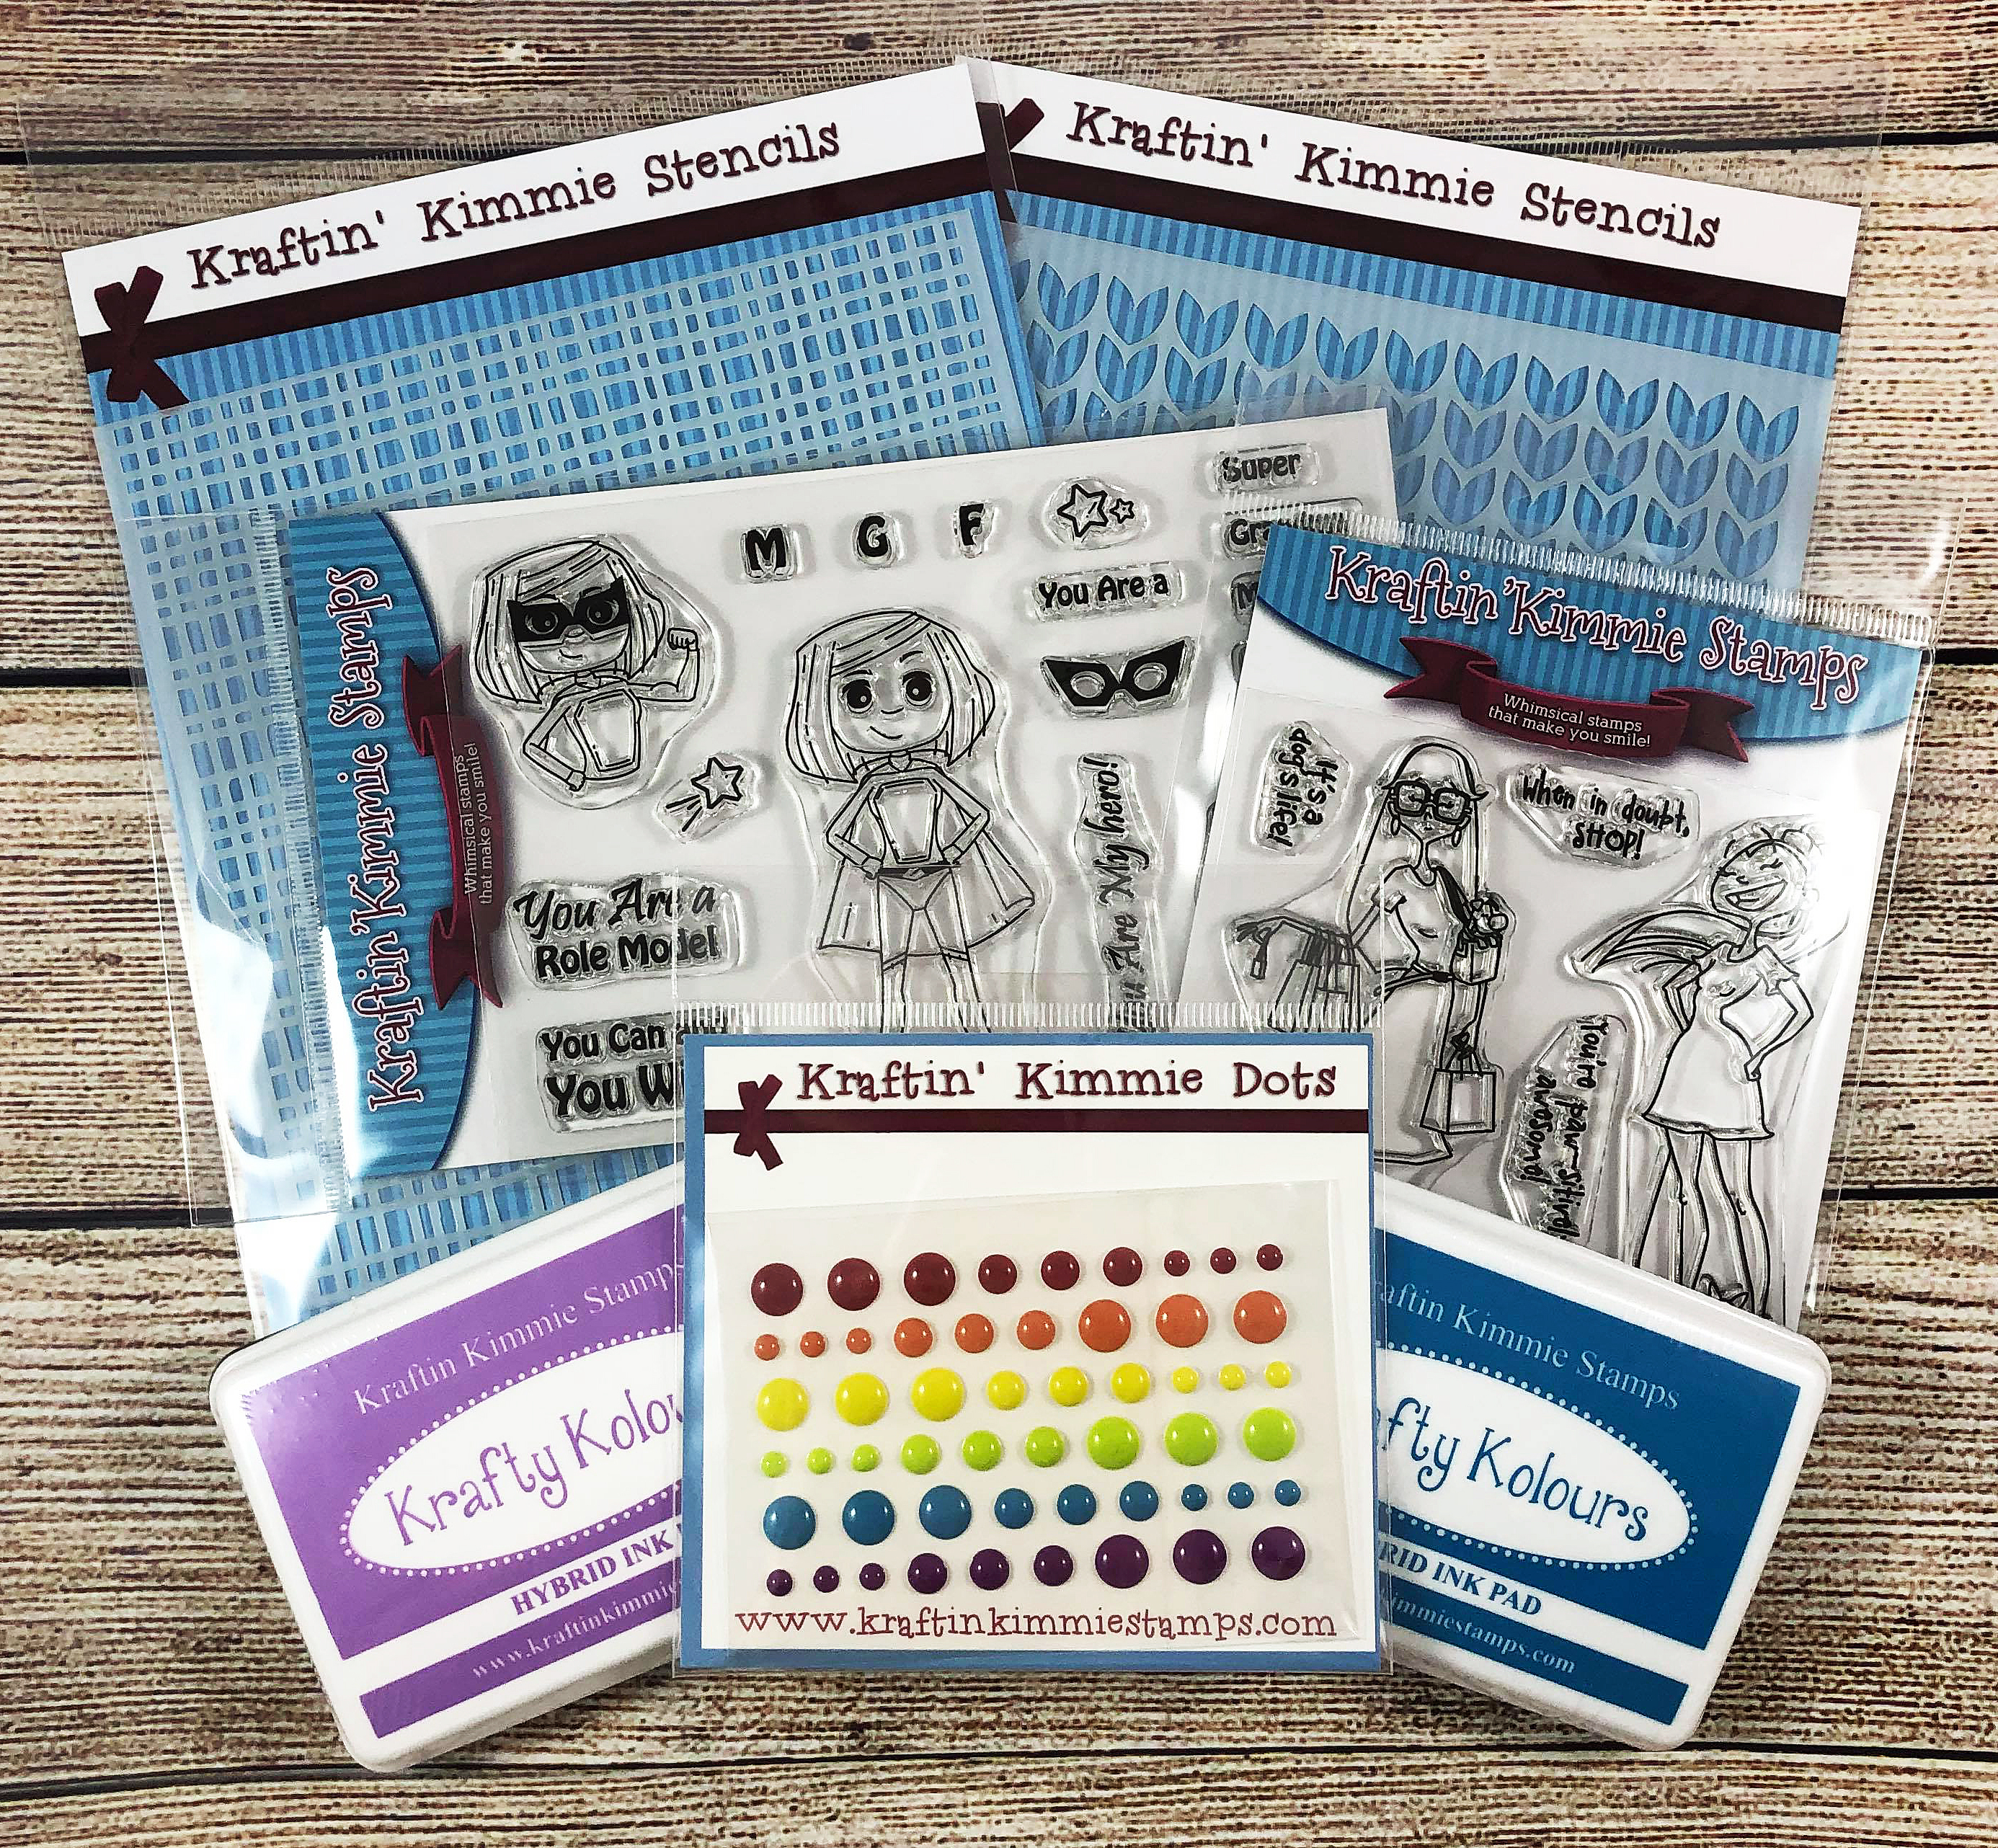 Kraftin' Kimmie Stamps Giveaway Prize Package | Creative Scrapbooker Magazine